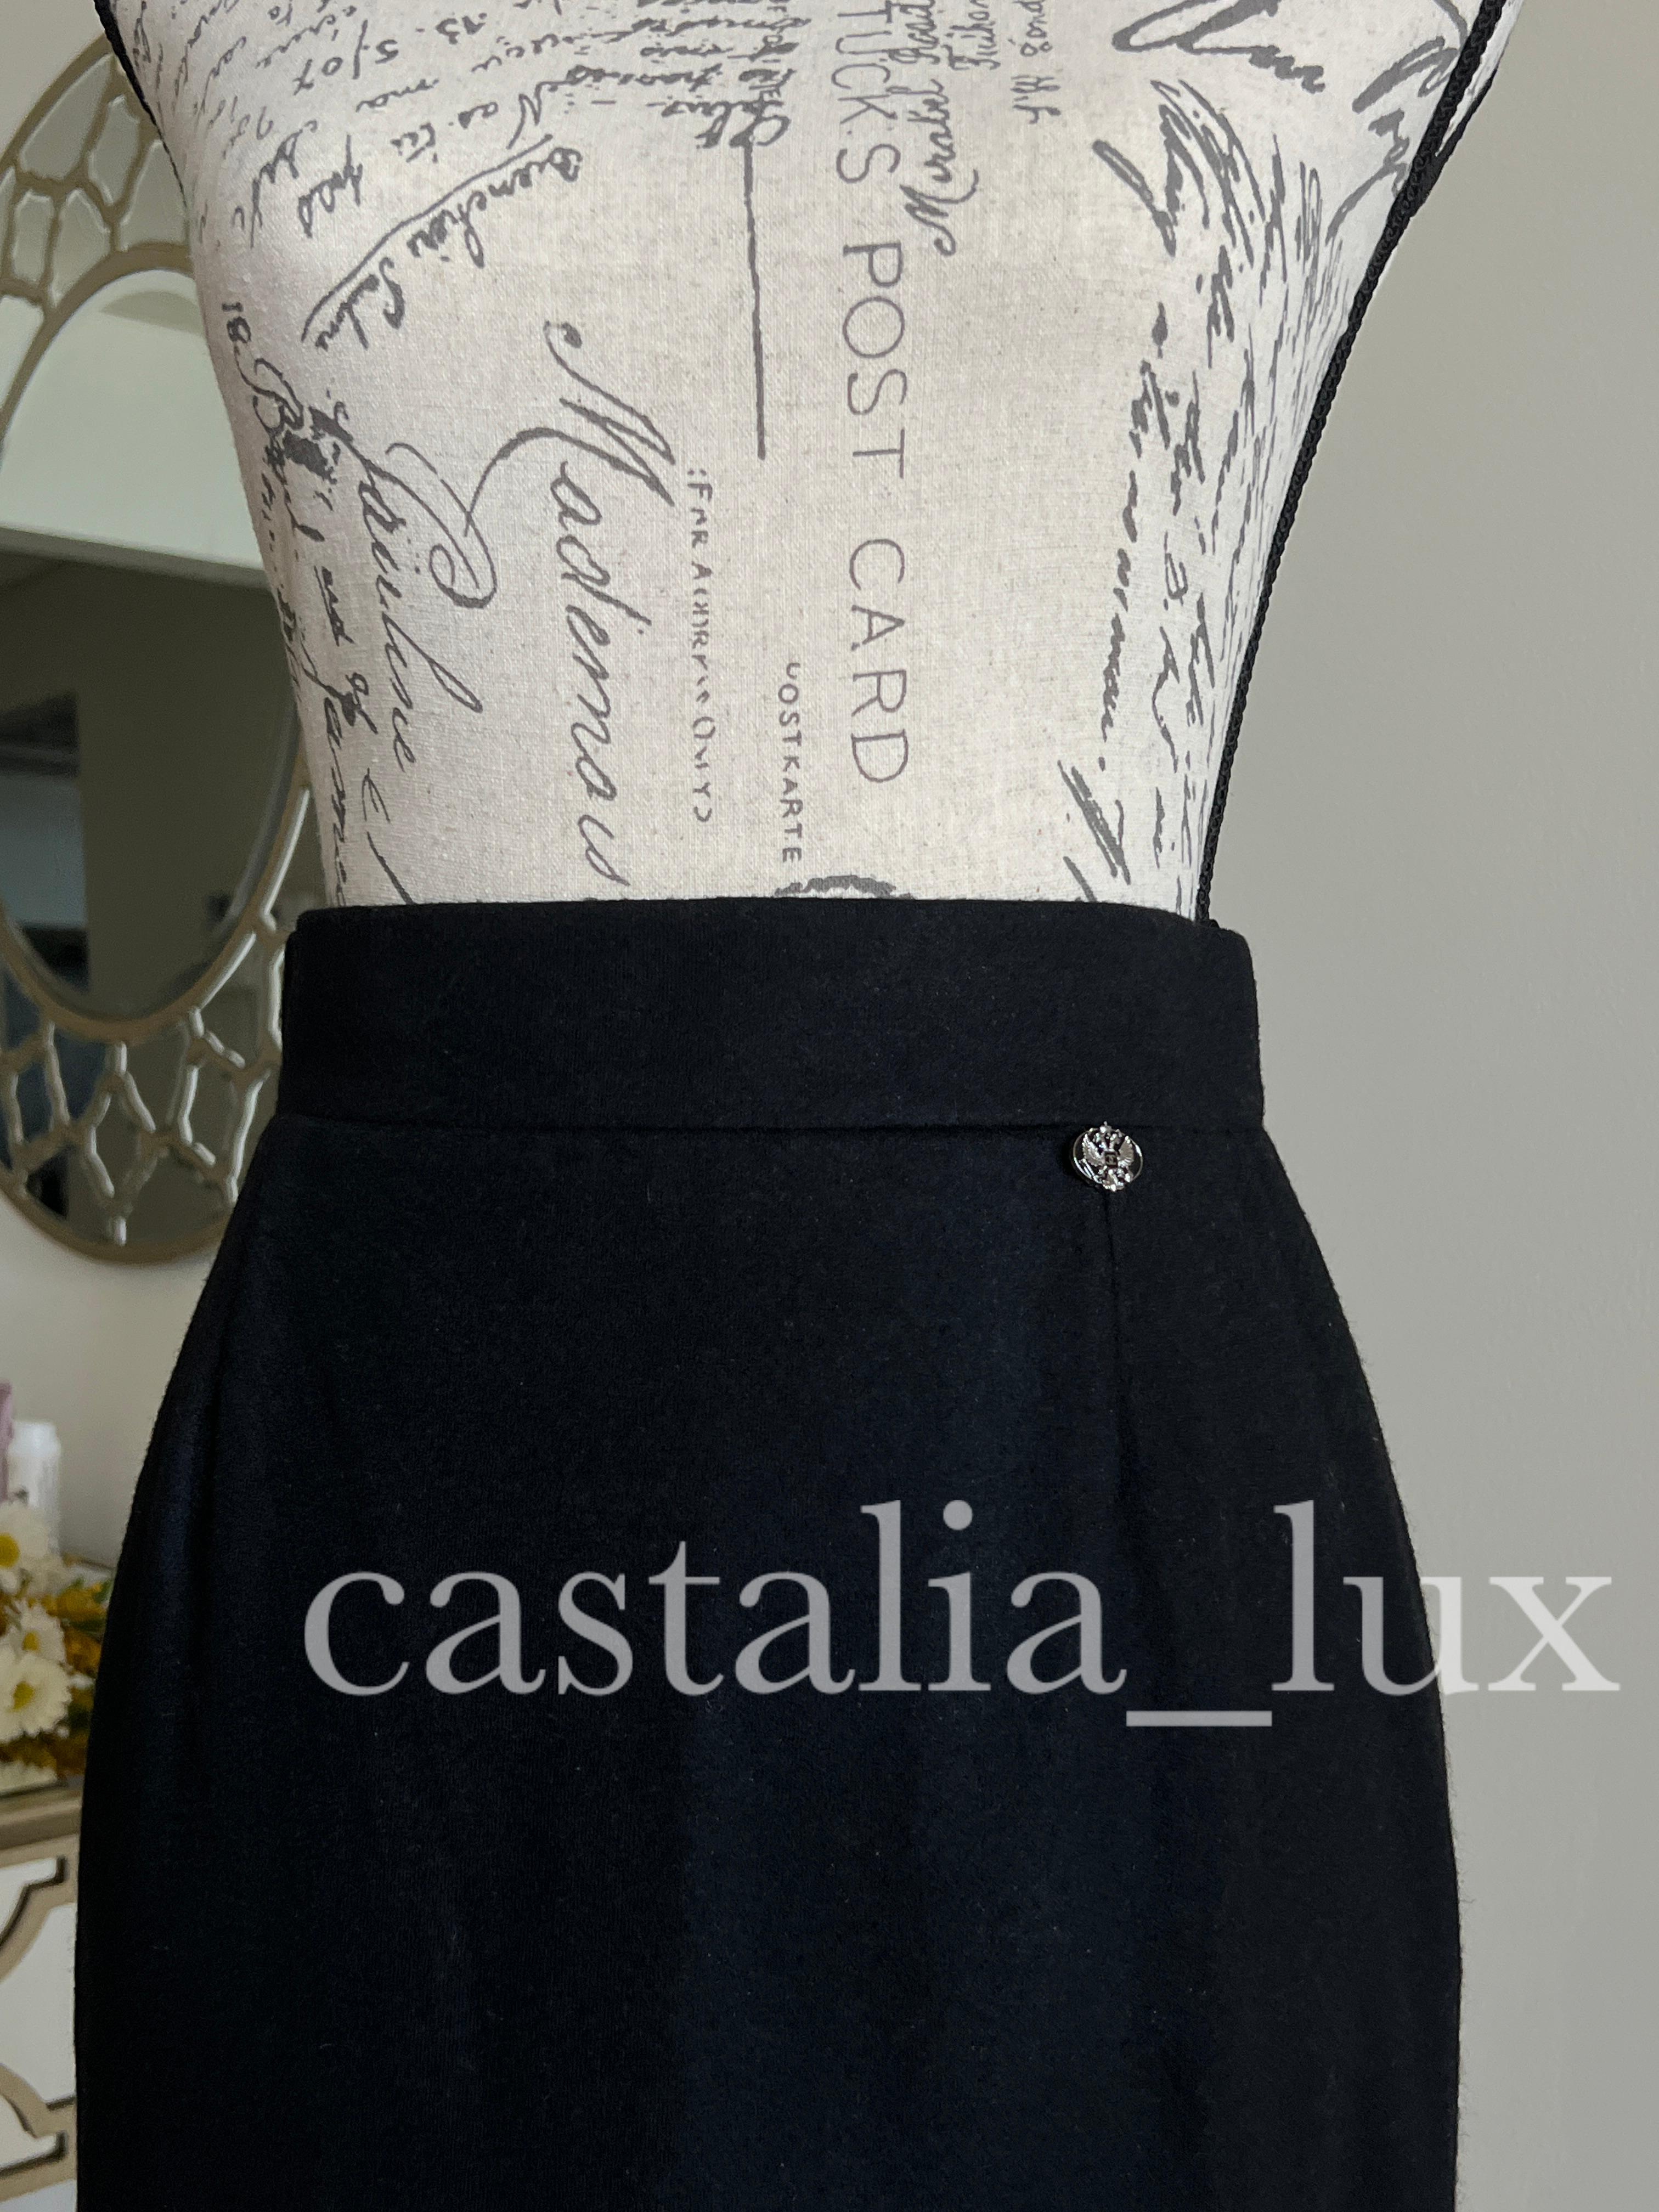 New Chanel black pencil skirt with CC logo Eagle charm at waist.
Fully lined with 100% silk. Size mark 38 fr. never worn.